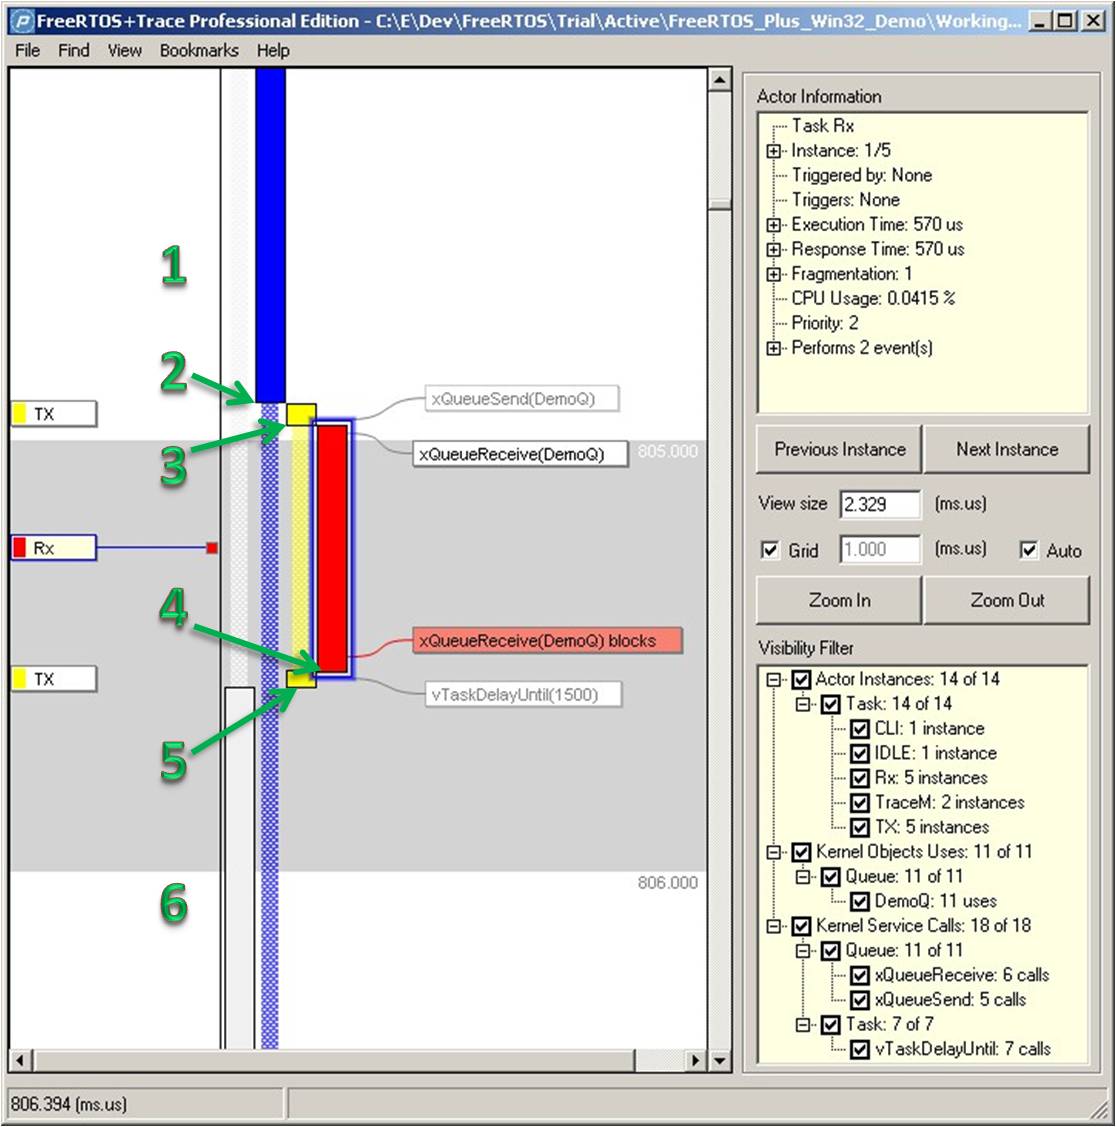 Viewing the RTOS trace in FreeRTOS-Plus-Trace